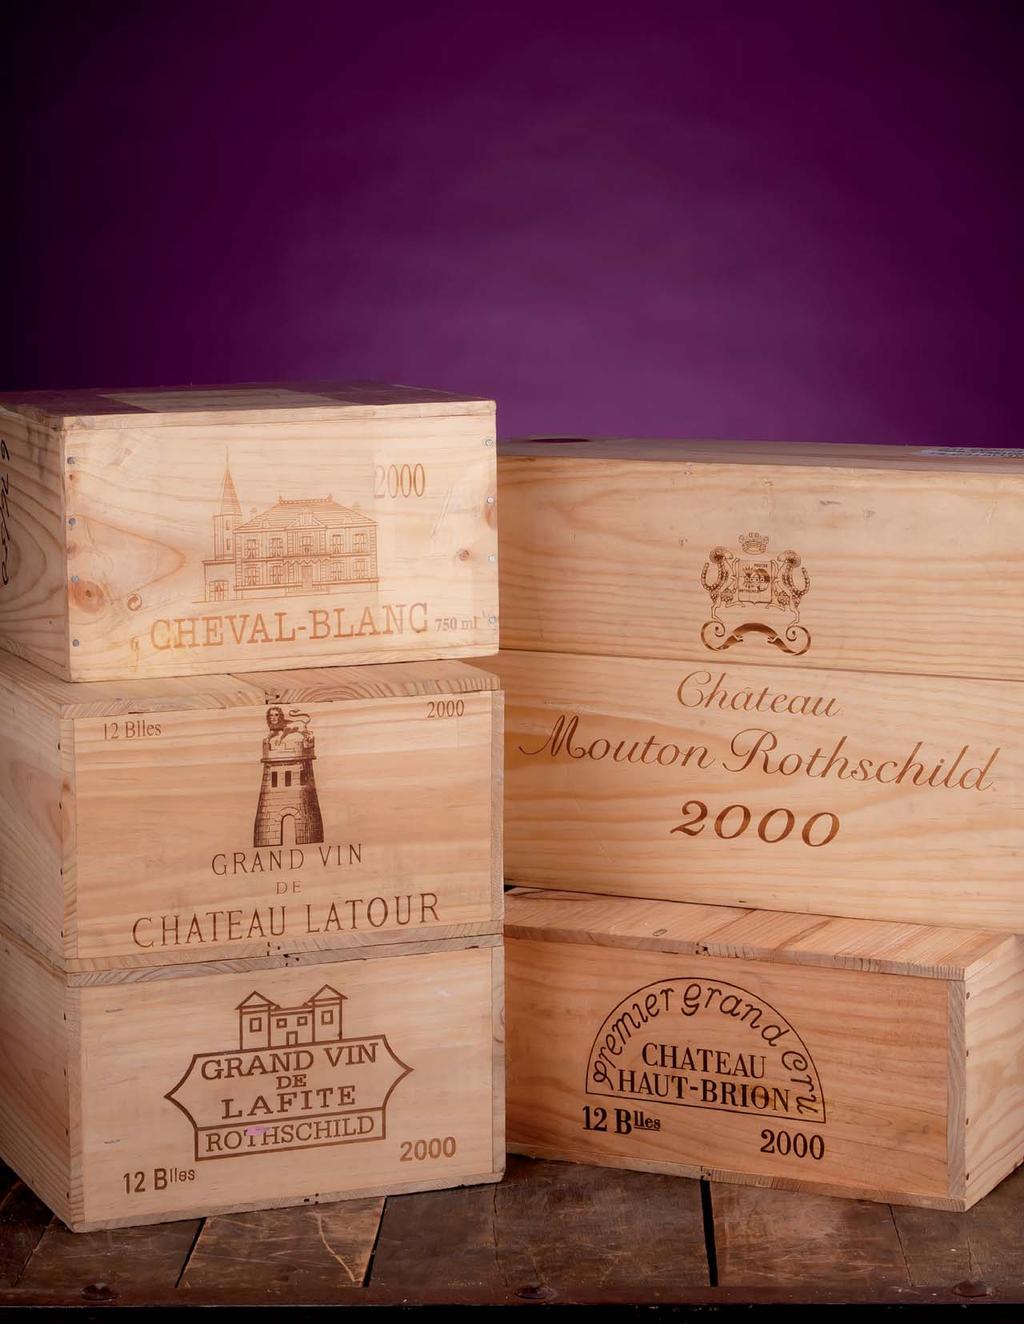 FINE BORDEAUX Available 24 Hours a Day on our Outstanding Retail Website Exceptional Service from our Team of Experts State of the Art Website with Real-Time Inventory In Stock, Fully Inspected and